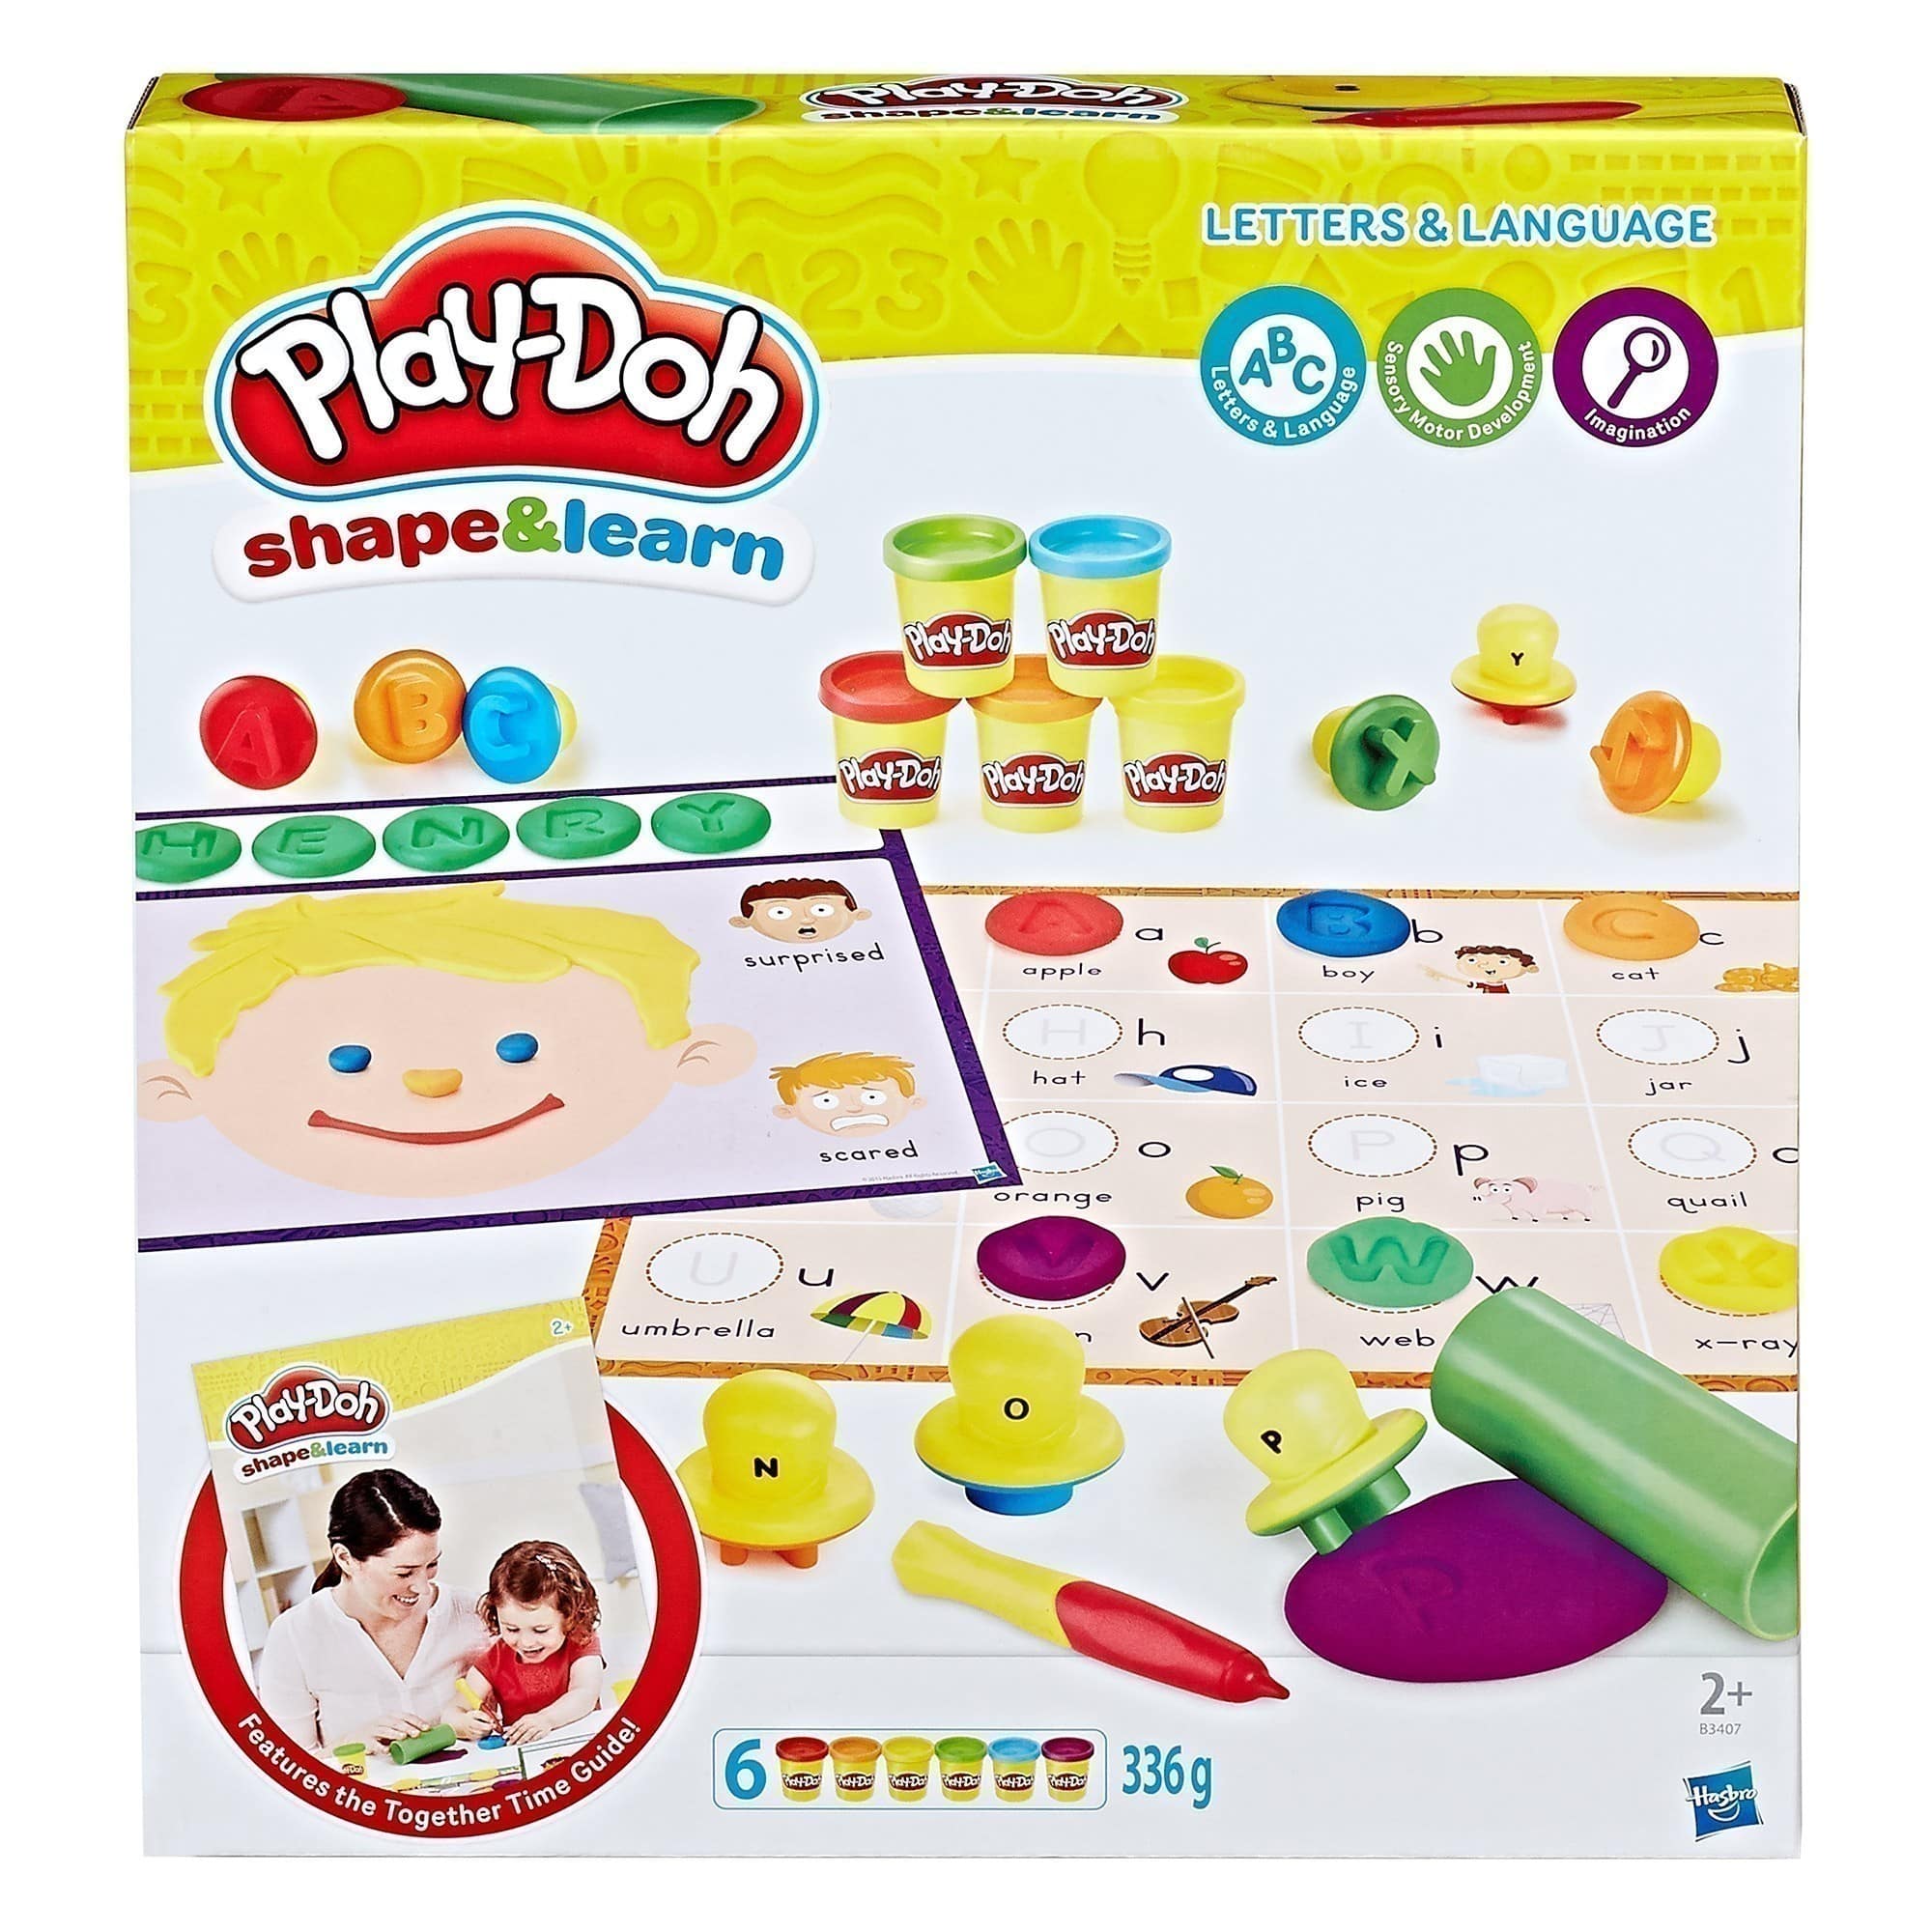 Play-Doh Shape & Learn - Letters & Language